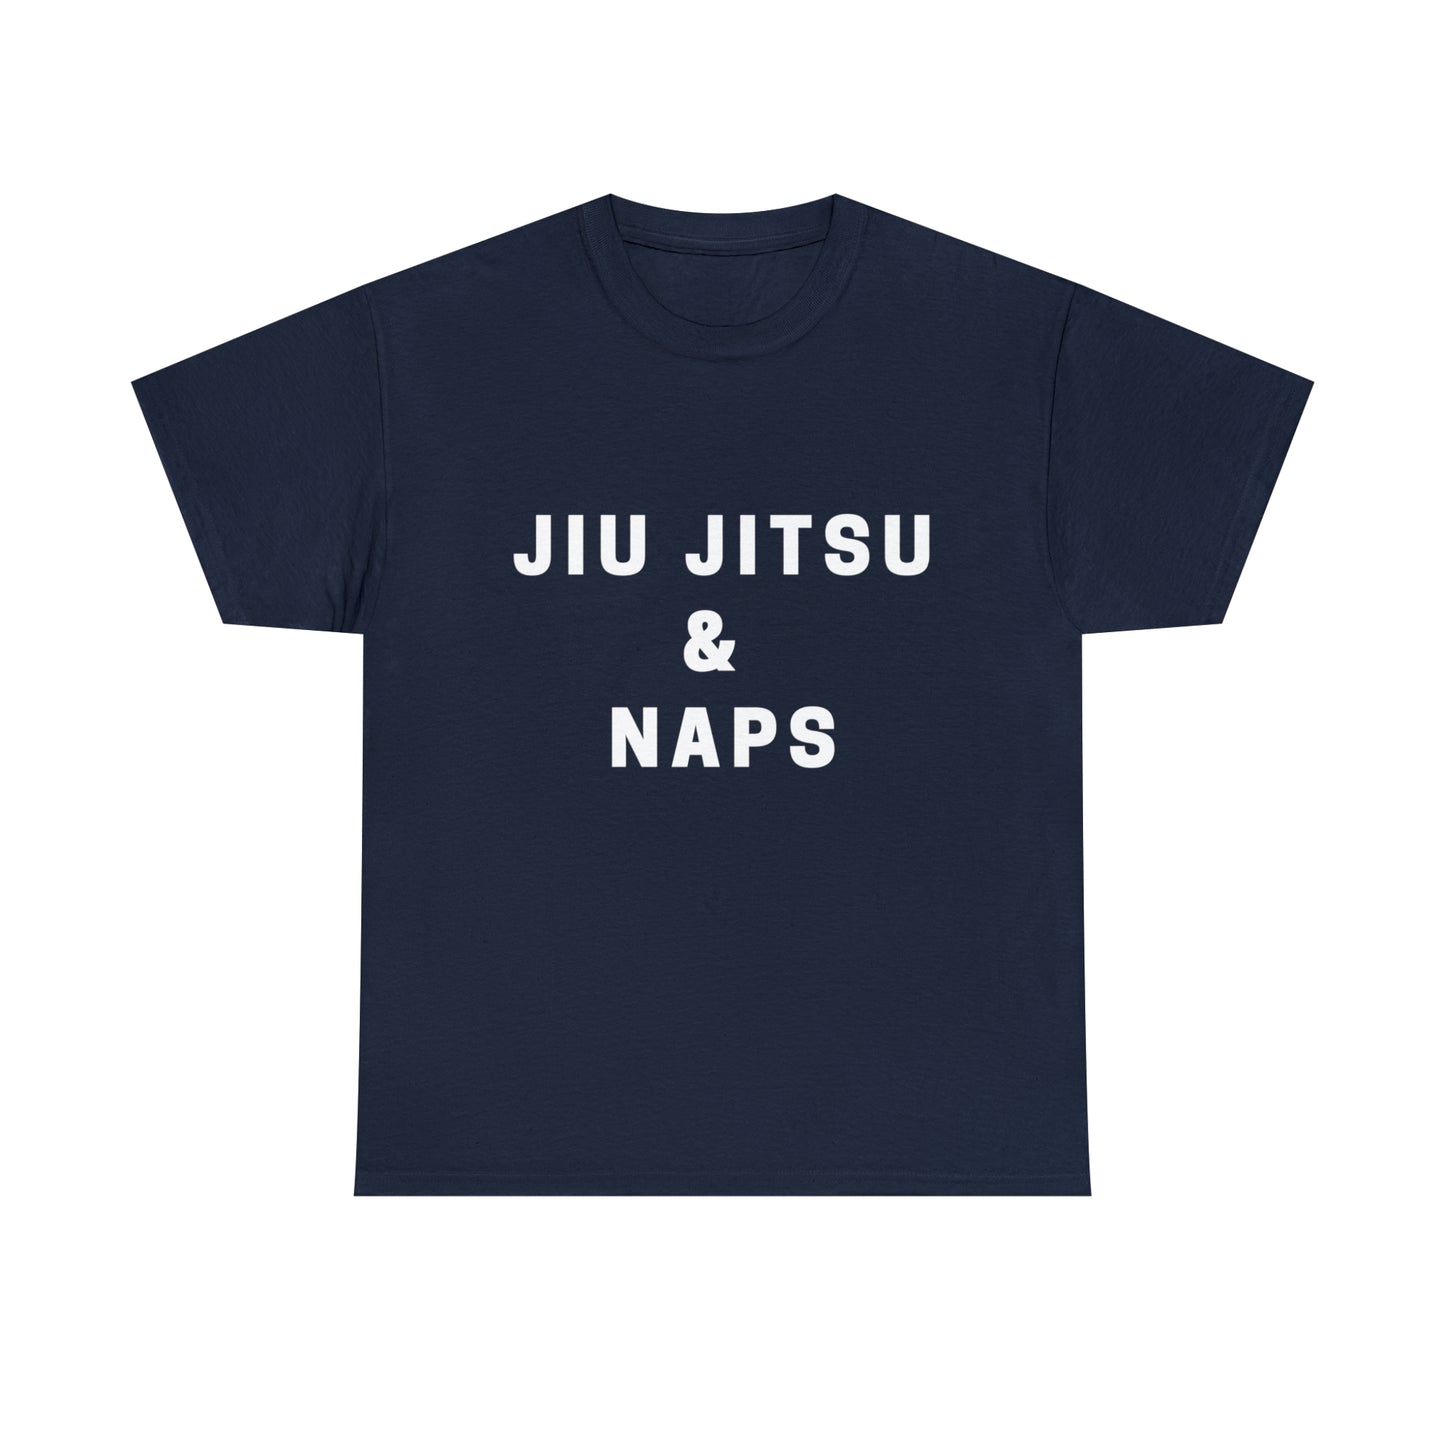 Judo and BJJ T-Shirts